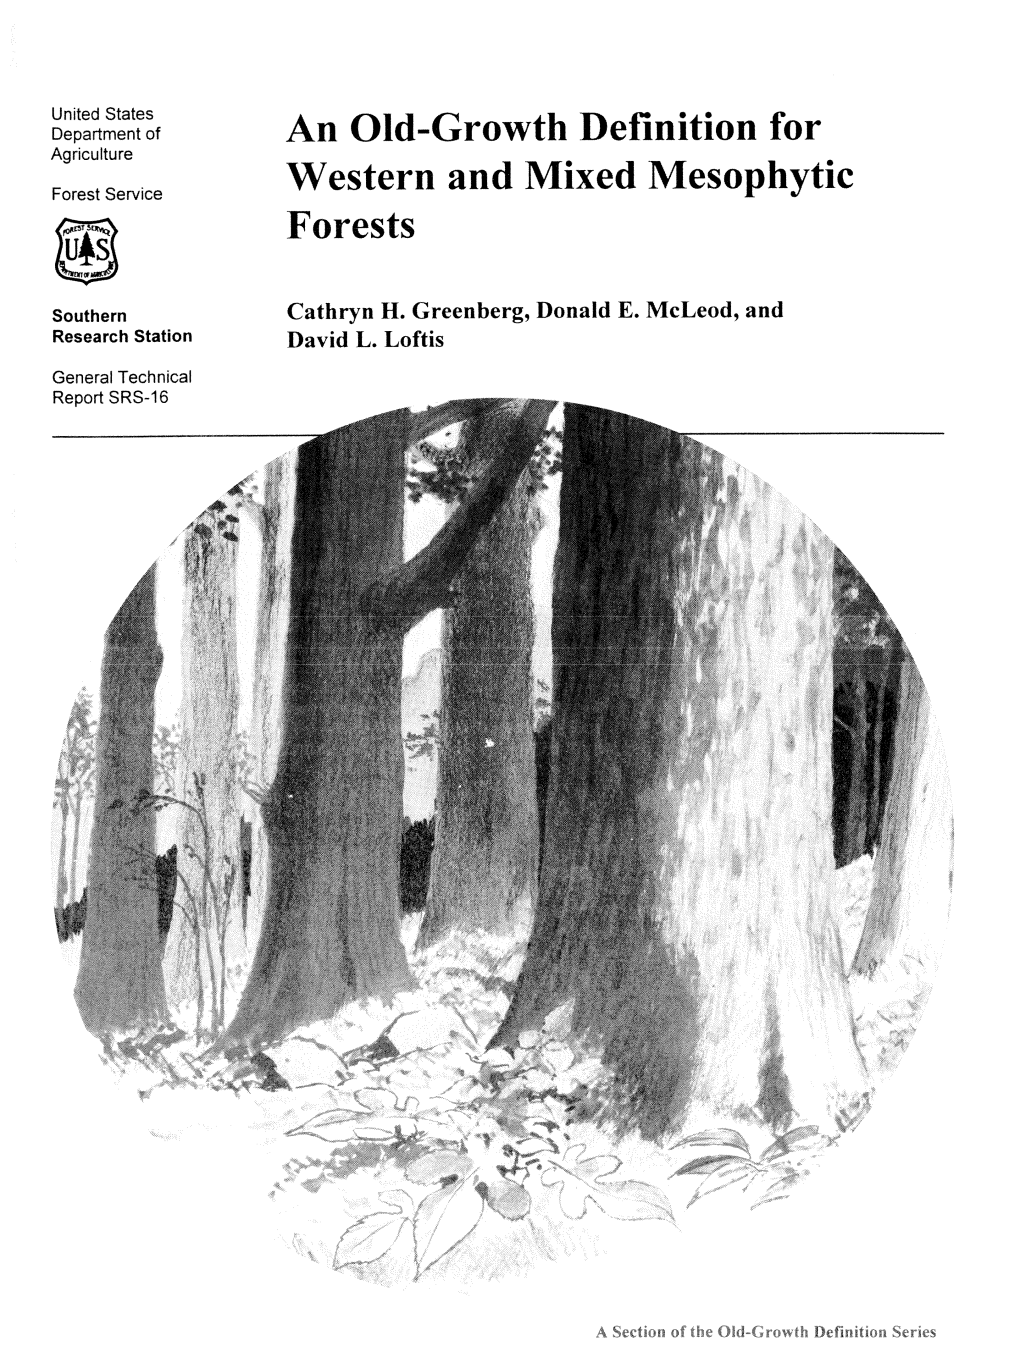 An Old-Growth Definition for Western and Mixed Mesophytic Forests